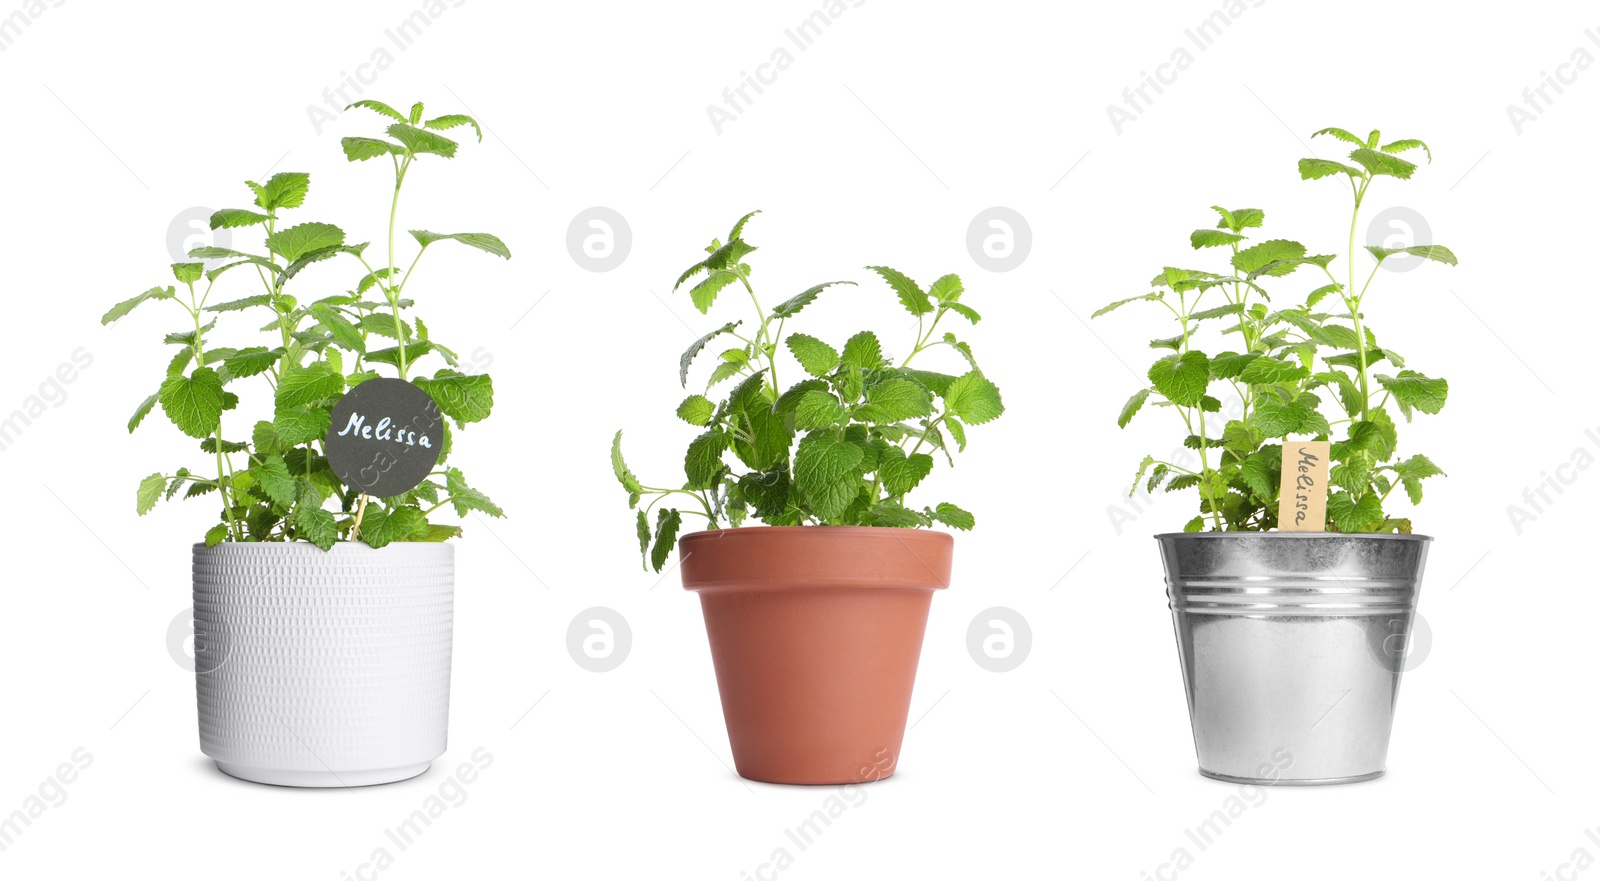 Image of Melissa growing in different pots isolated on white